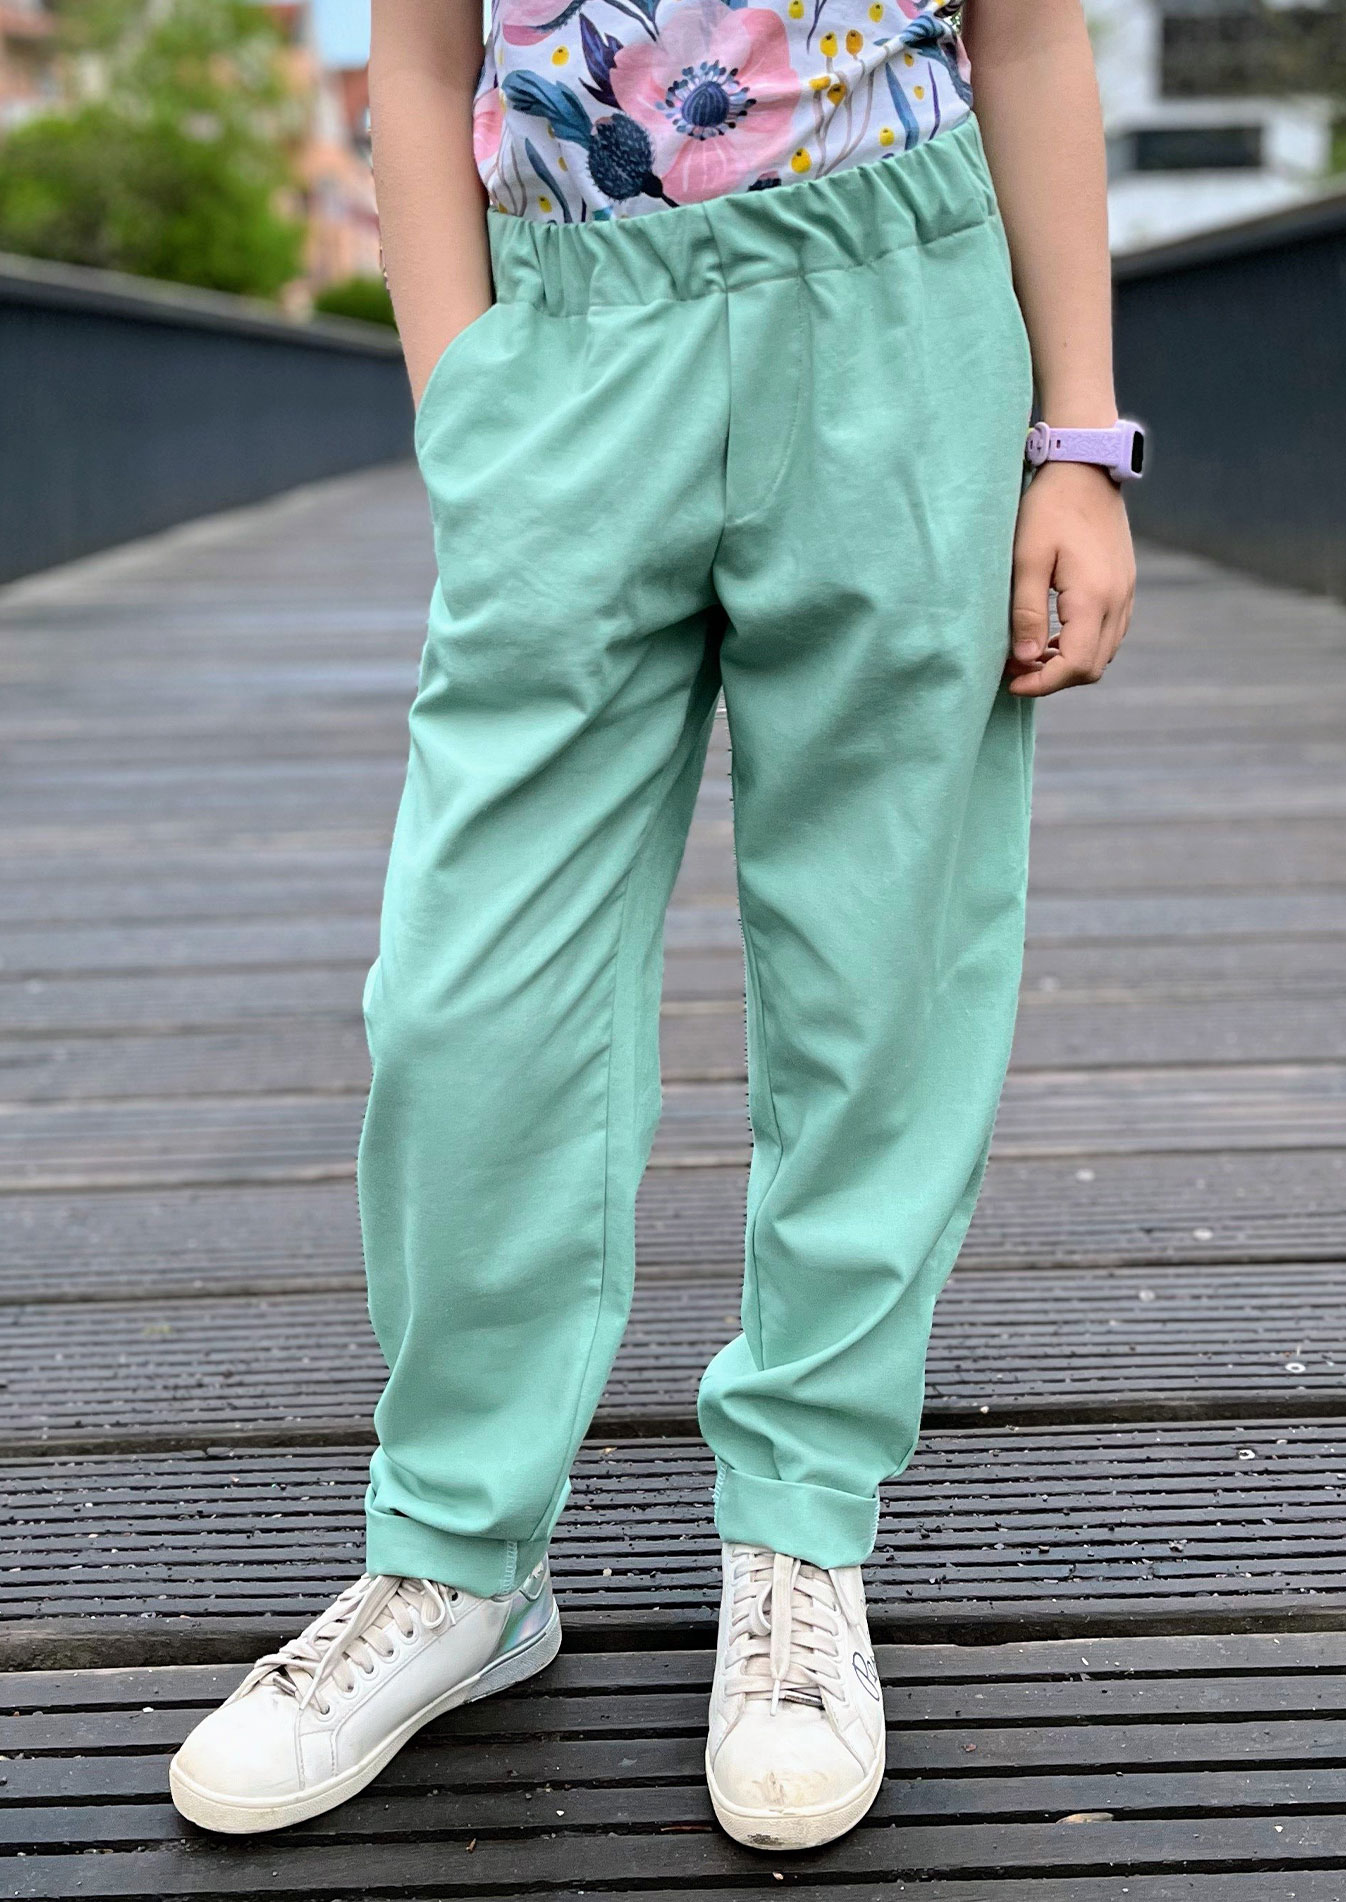 Snyggli-Schnittmuster-Loose-fit-Hose-Solskin-Cord-Canvas-Chino-Leinen-Babys-Kinder-Teens-Junge-Mädchen-Gr-128-170-Cord-Canvas-Leinen-Chino-mint-mädchen